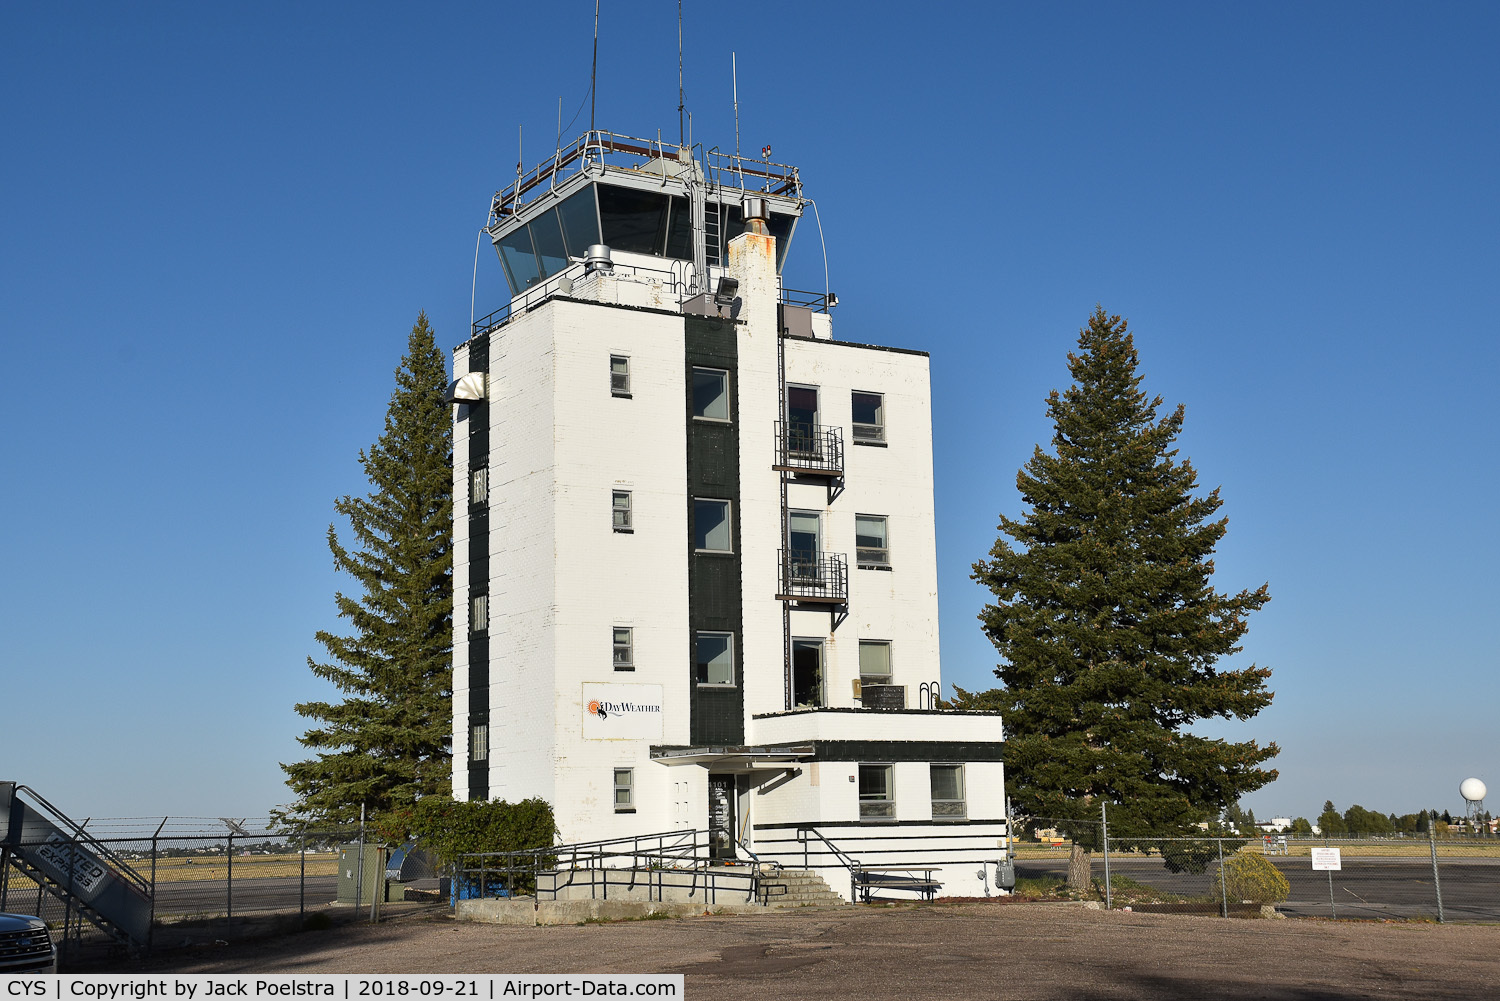 Cheyenne Rgnl/jerry Olson Field Airport (CYS) - Tower of Cheyenne airport (out of order)